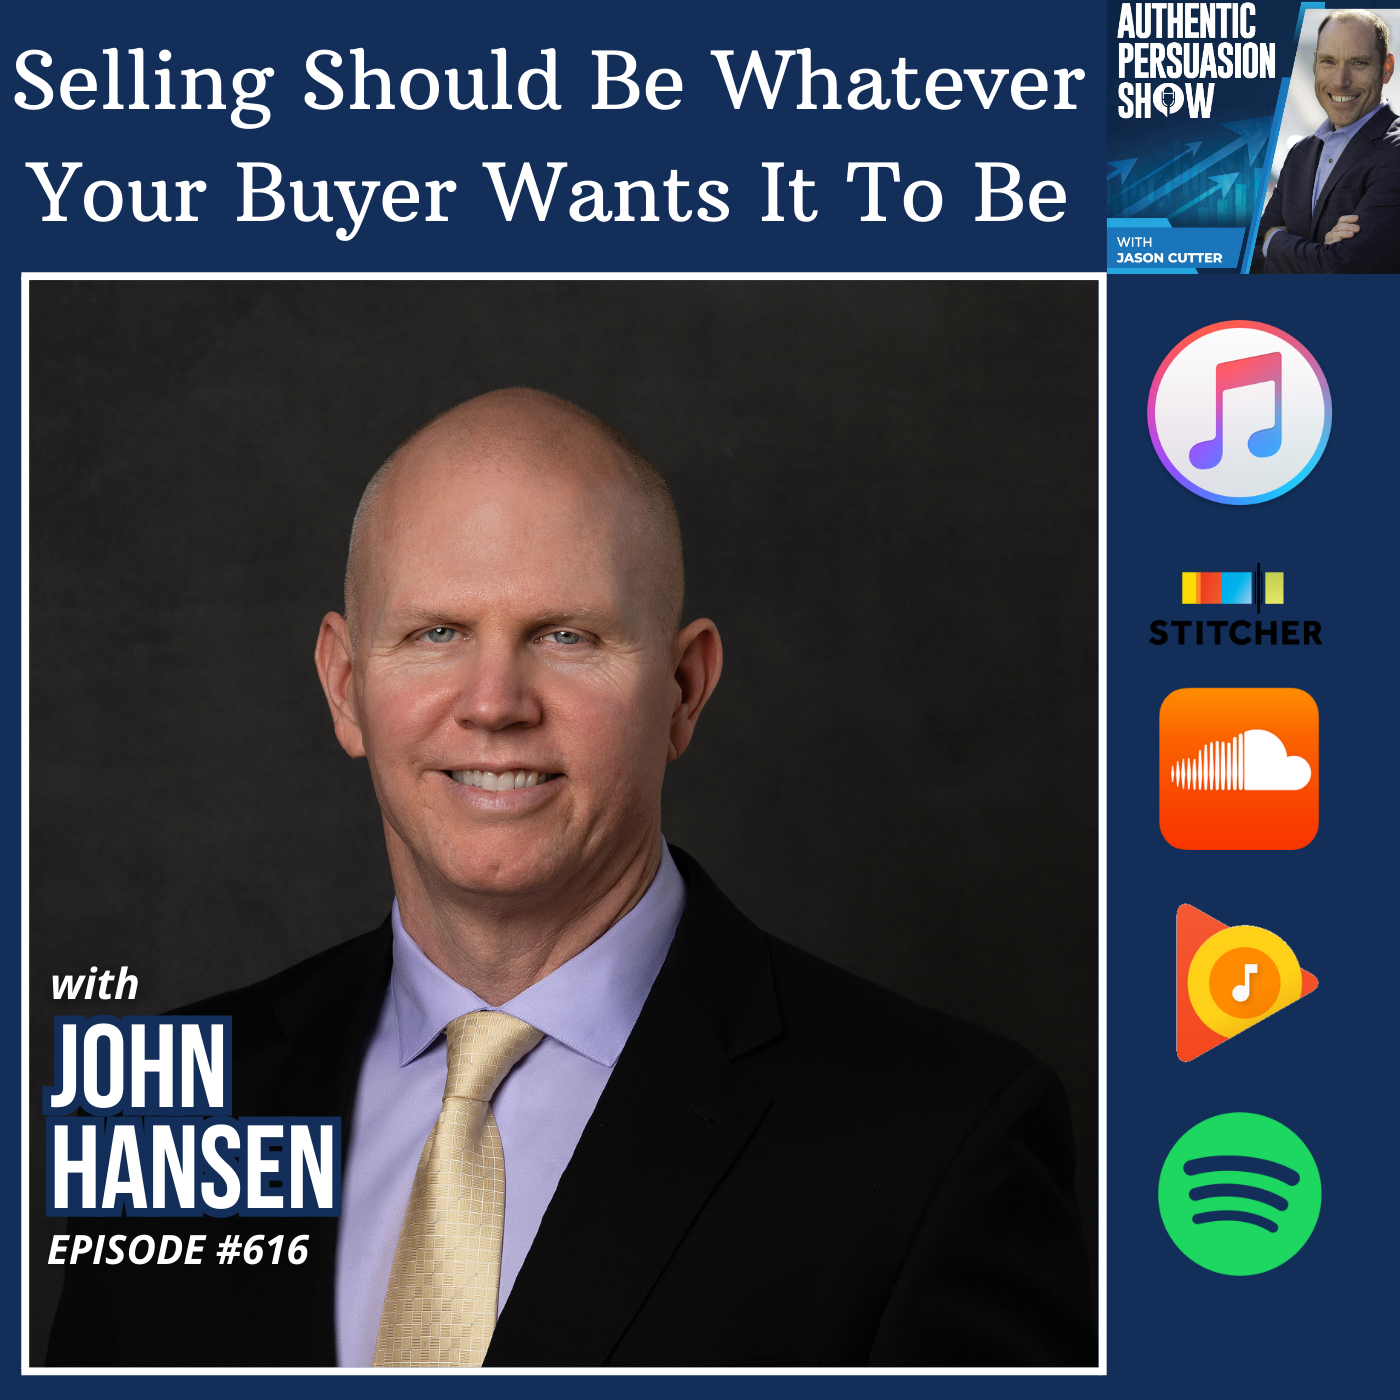 [616] Selling Should Be Whatever Your Buyer Wants It To Be, with Dr. John Hansen from the University of Alabama, Birmingham